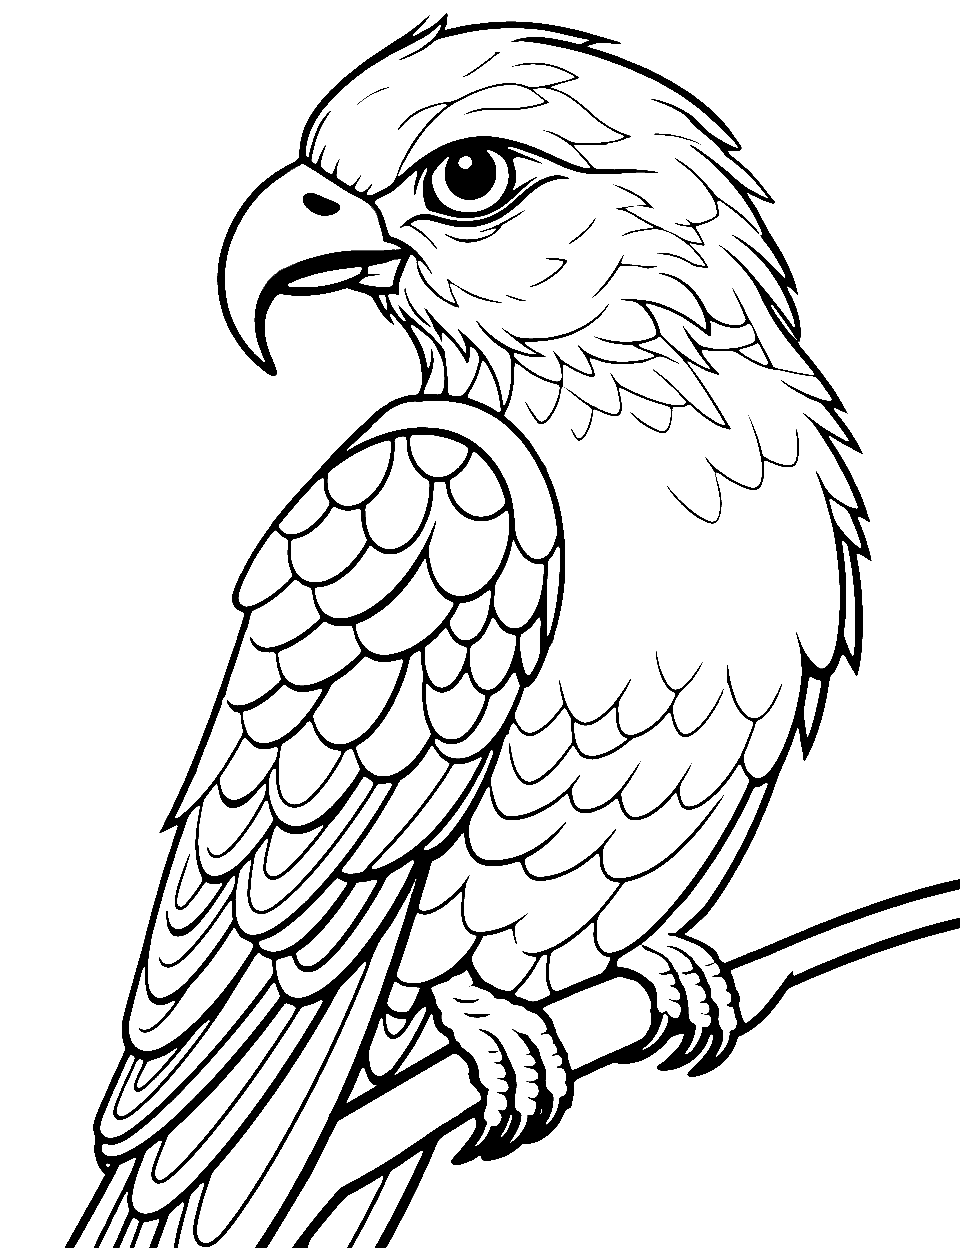 Falcon's Intense Stare Coloring Page - A falcon locking its sights on an unseen target.